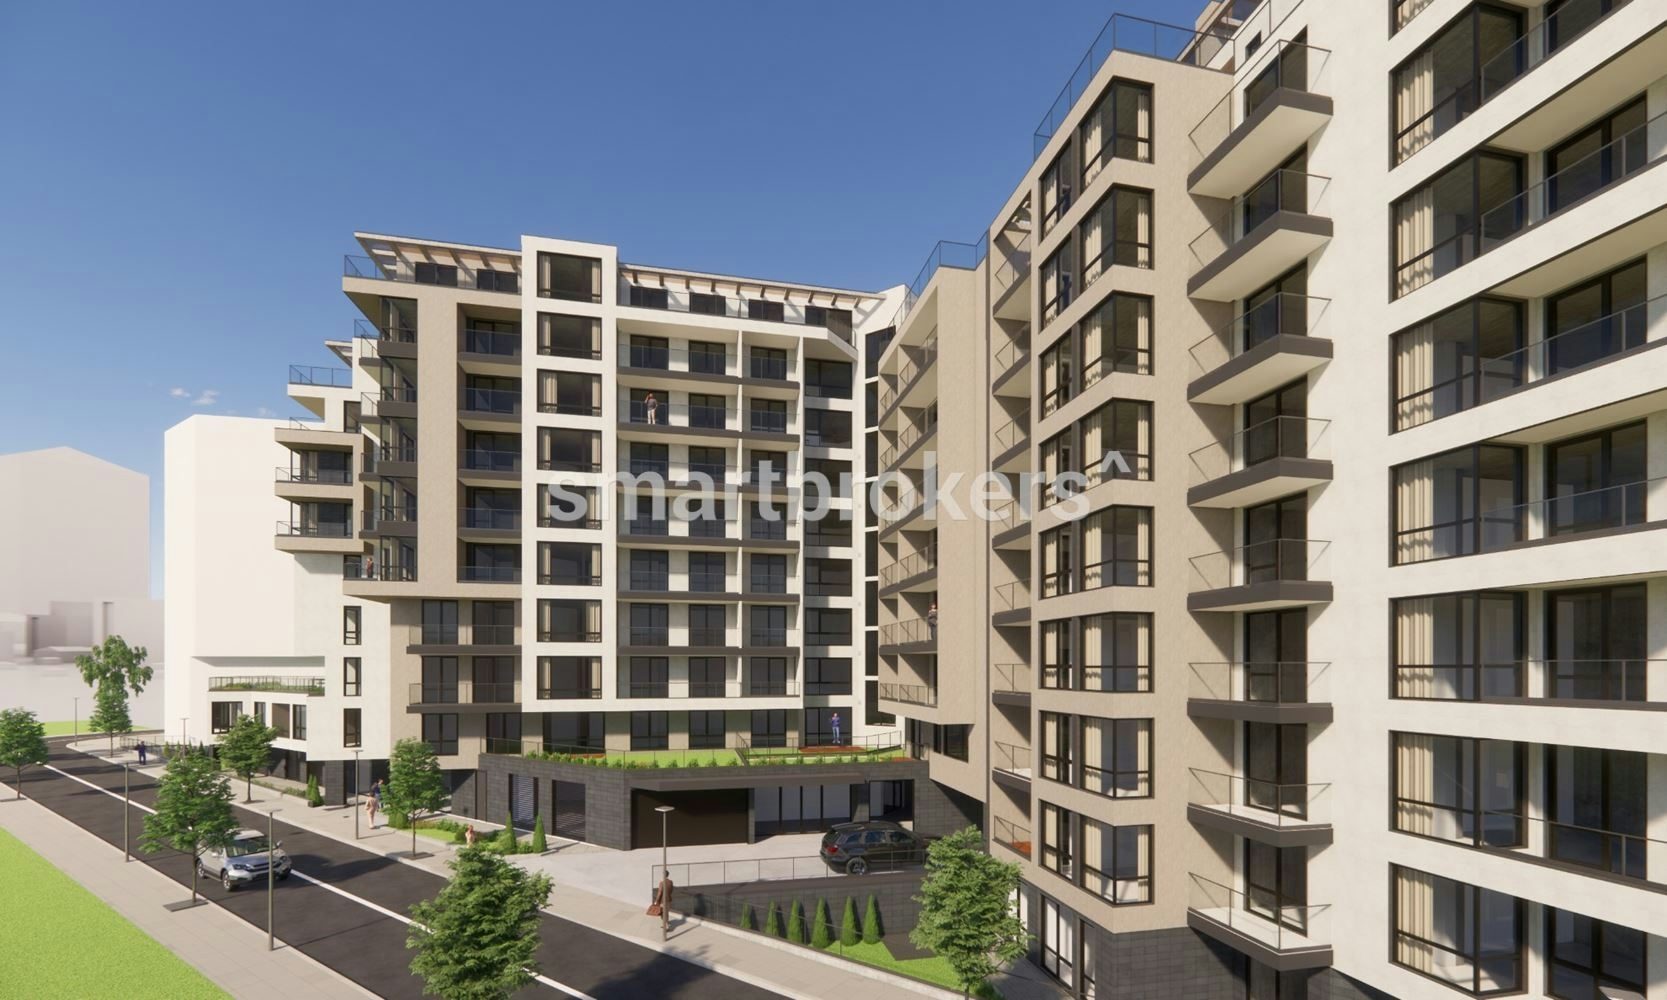 Two-bedroom apartment for sale on putty and plaster in a newly constructed building in Poligona district, built with high-end materials, near The Mall